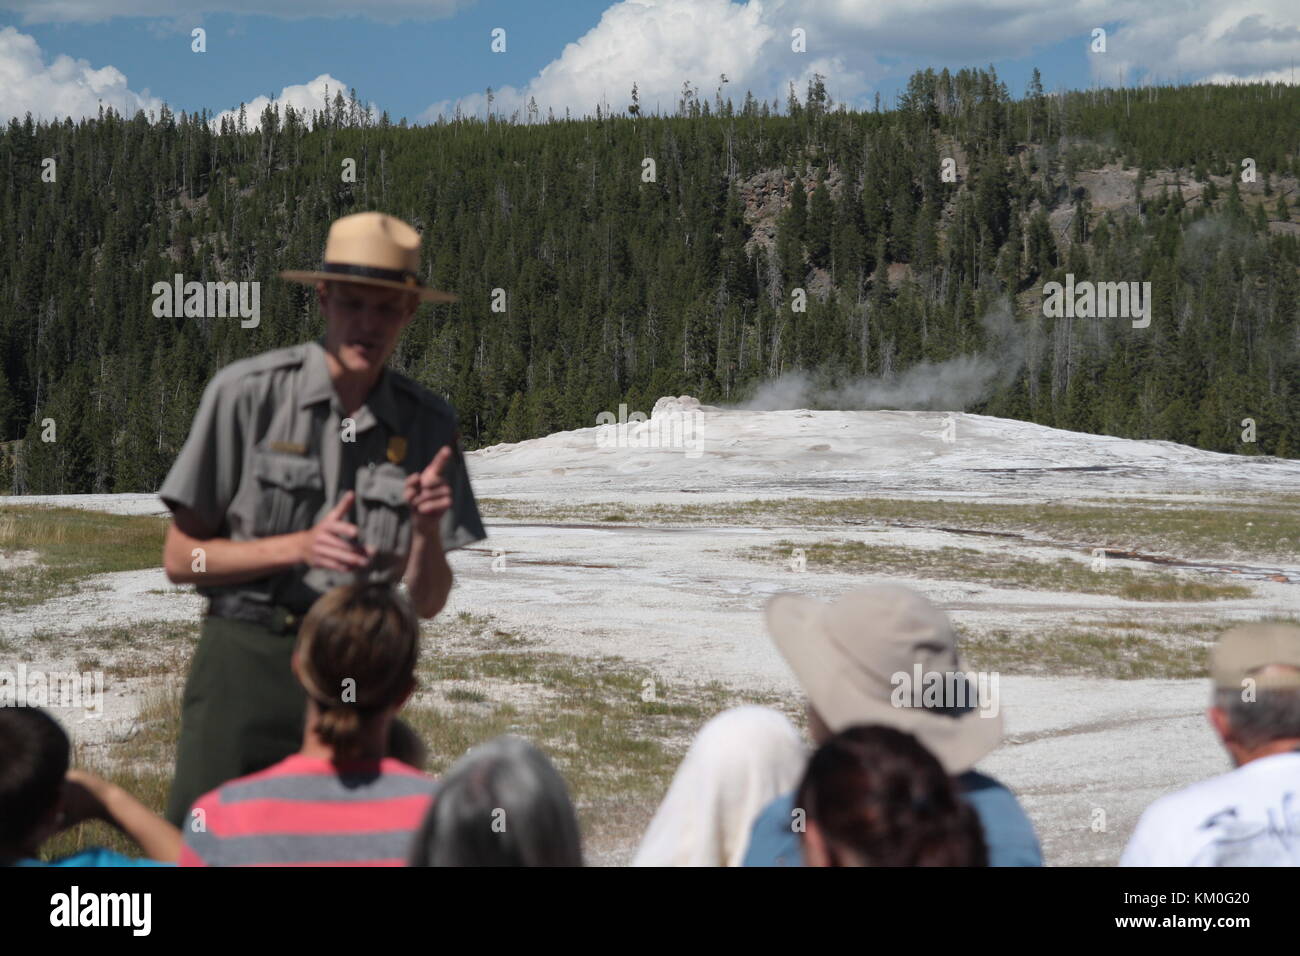 A Park Ranger In Uniform Explains To Visitors The Functioning Of The Famous Old Faithful Geyser